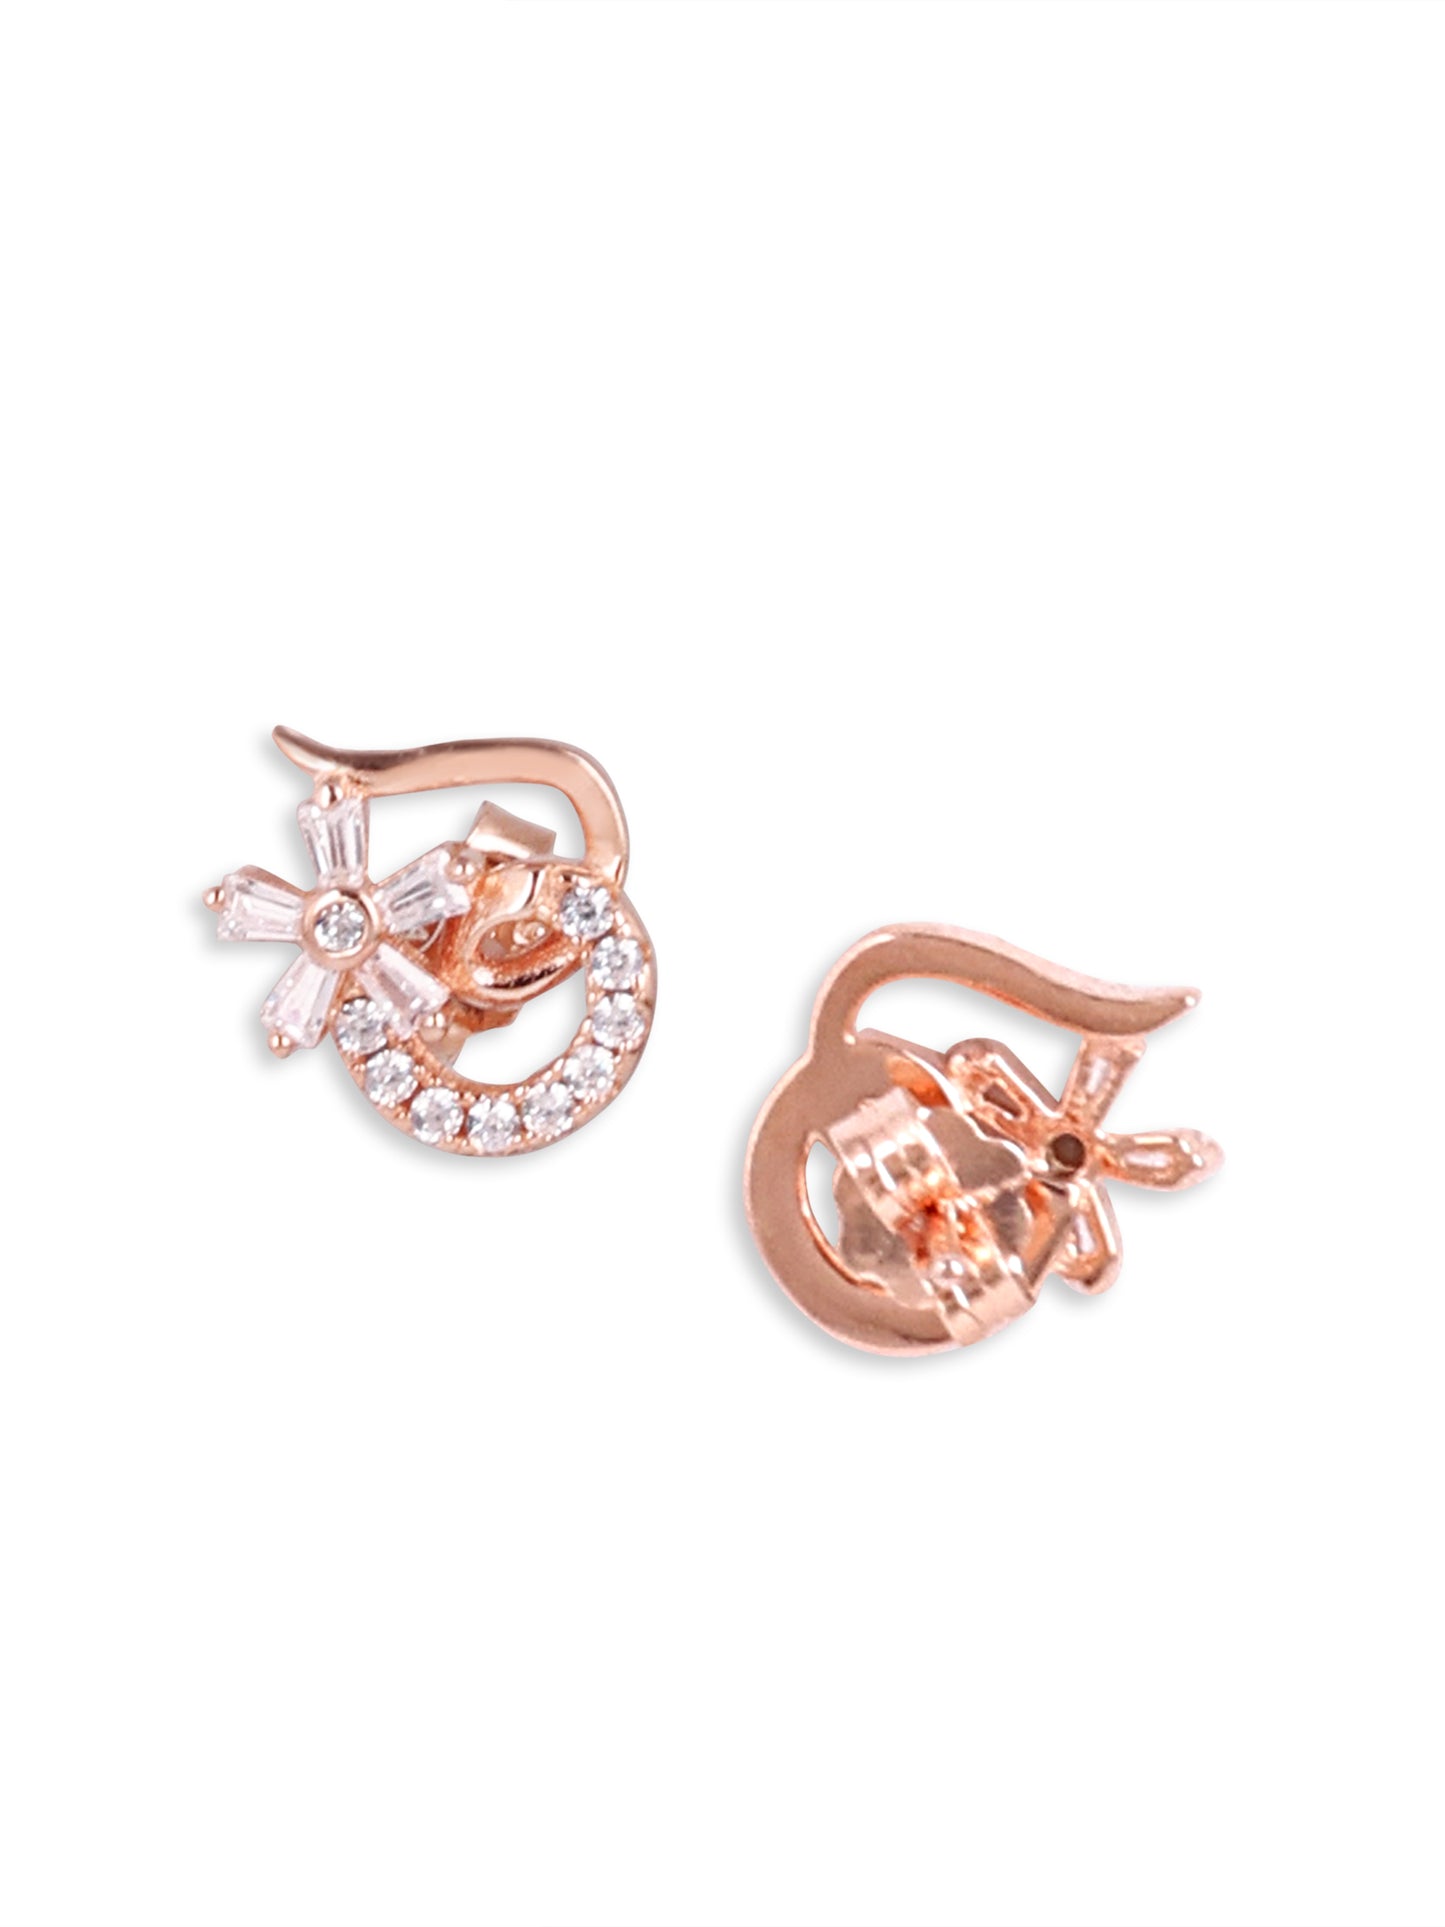 Flower Pendant with set Rose gold